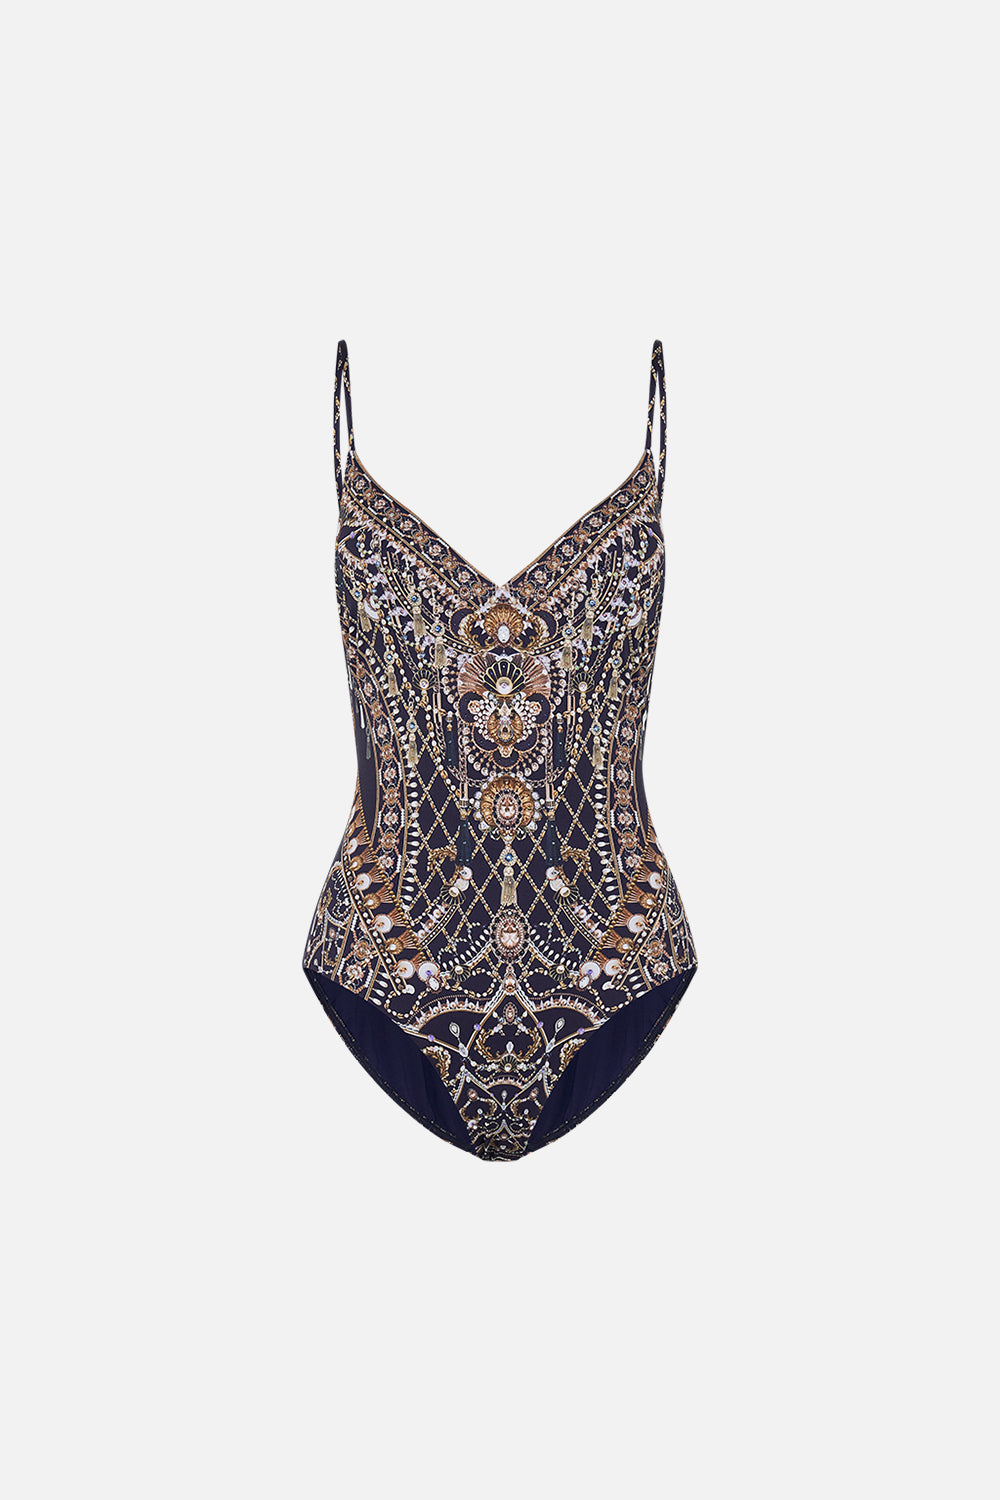 CAMILLA luxury onepiece swimsuit in Dance With The Duke print